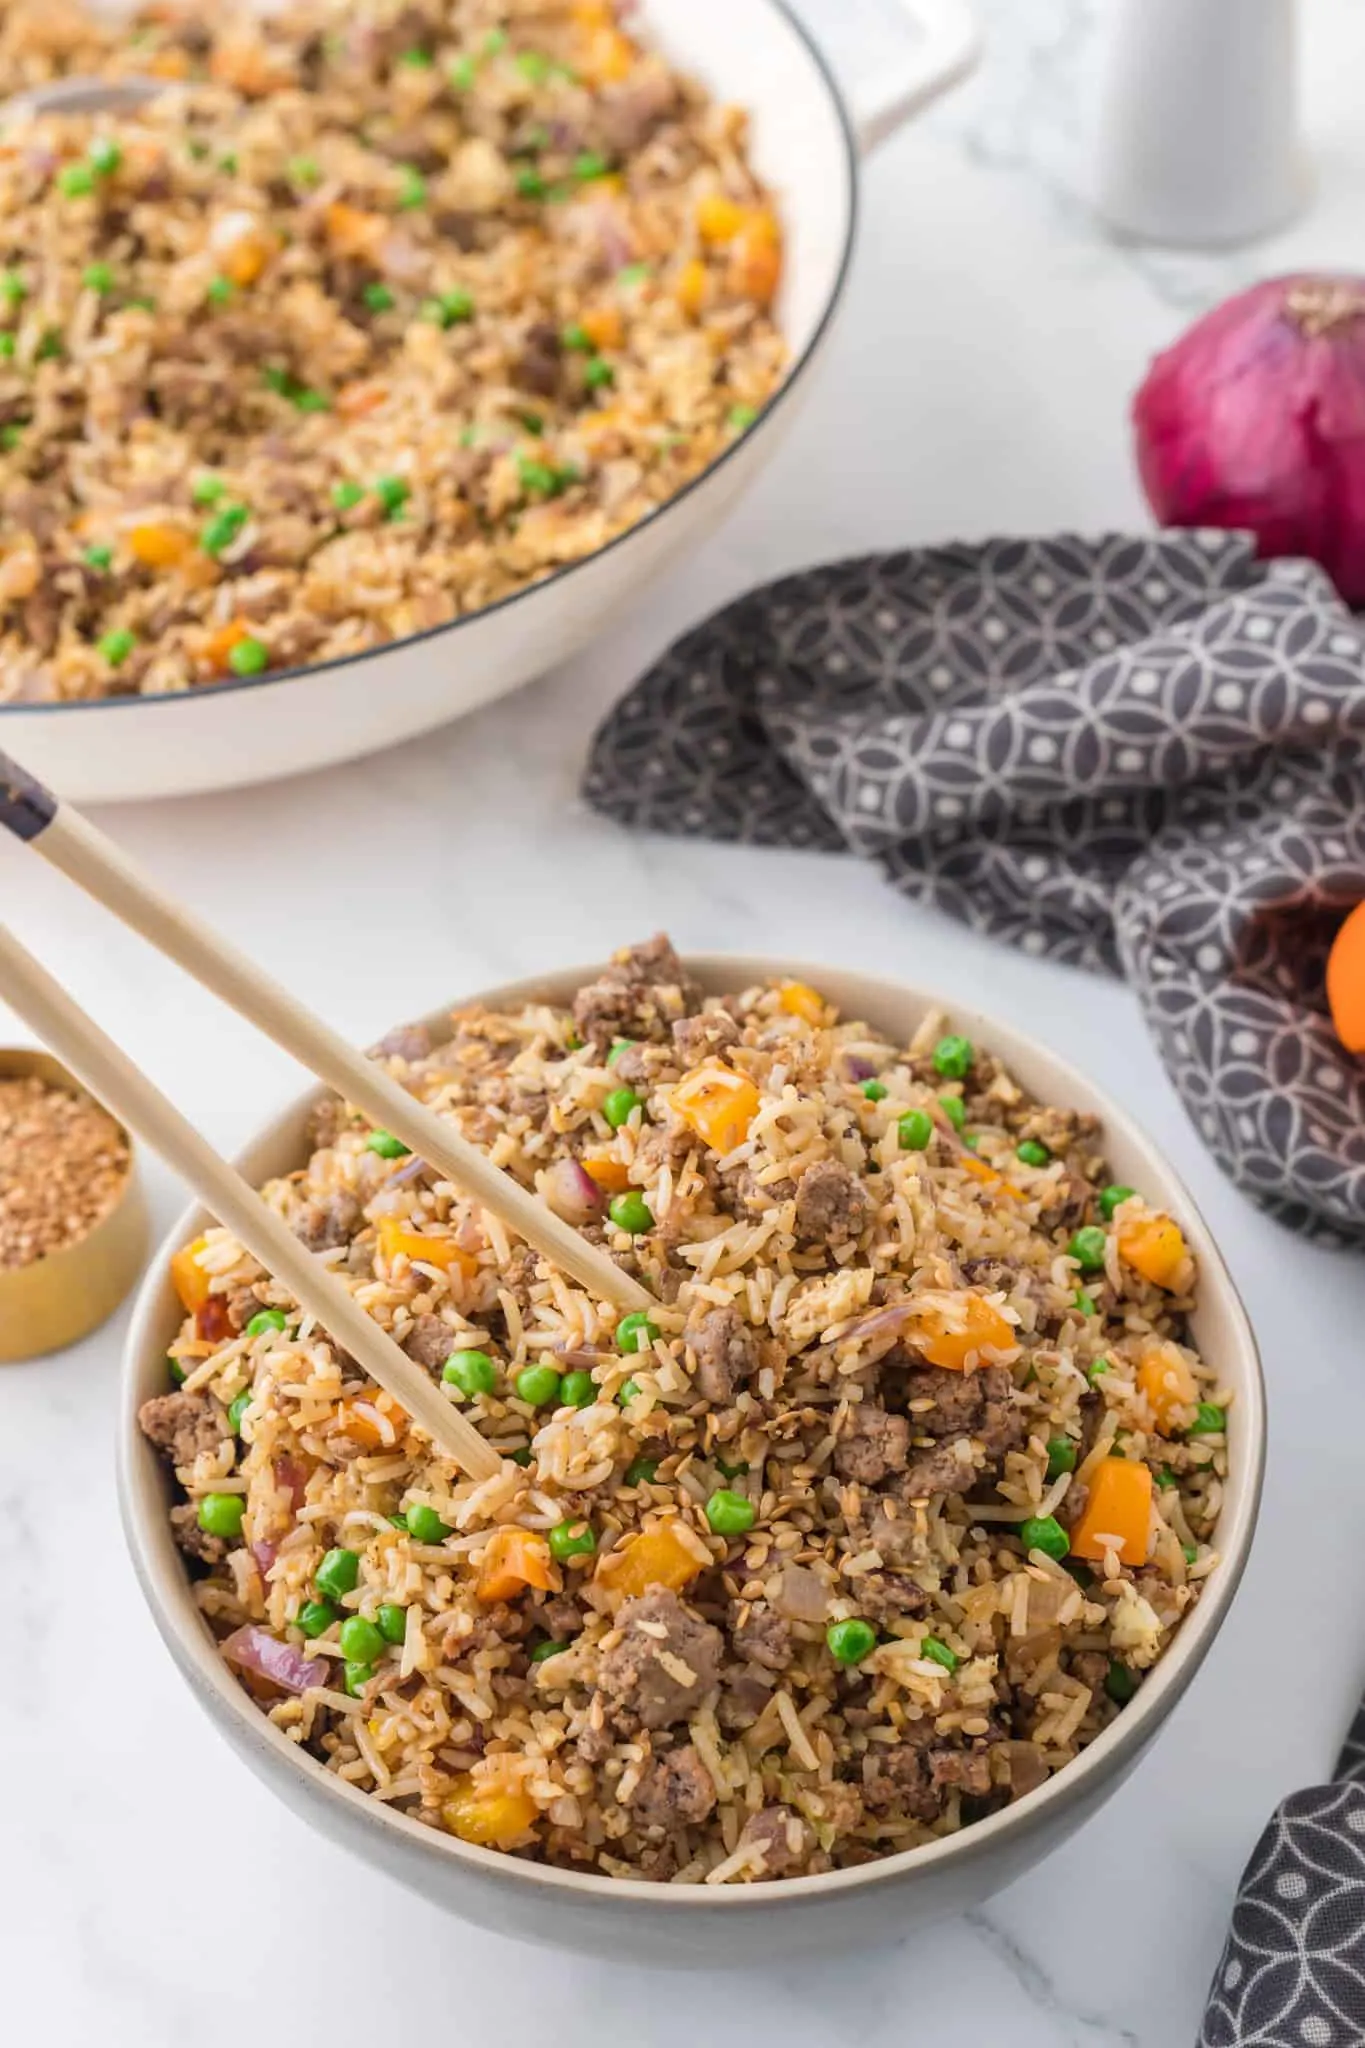 Ground Beef Fried Rice is an easy dinner recipe made with long grain rice and loaded with ground beef, diced bell peppers, peas, sesame seeds and eggs.